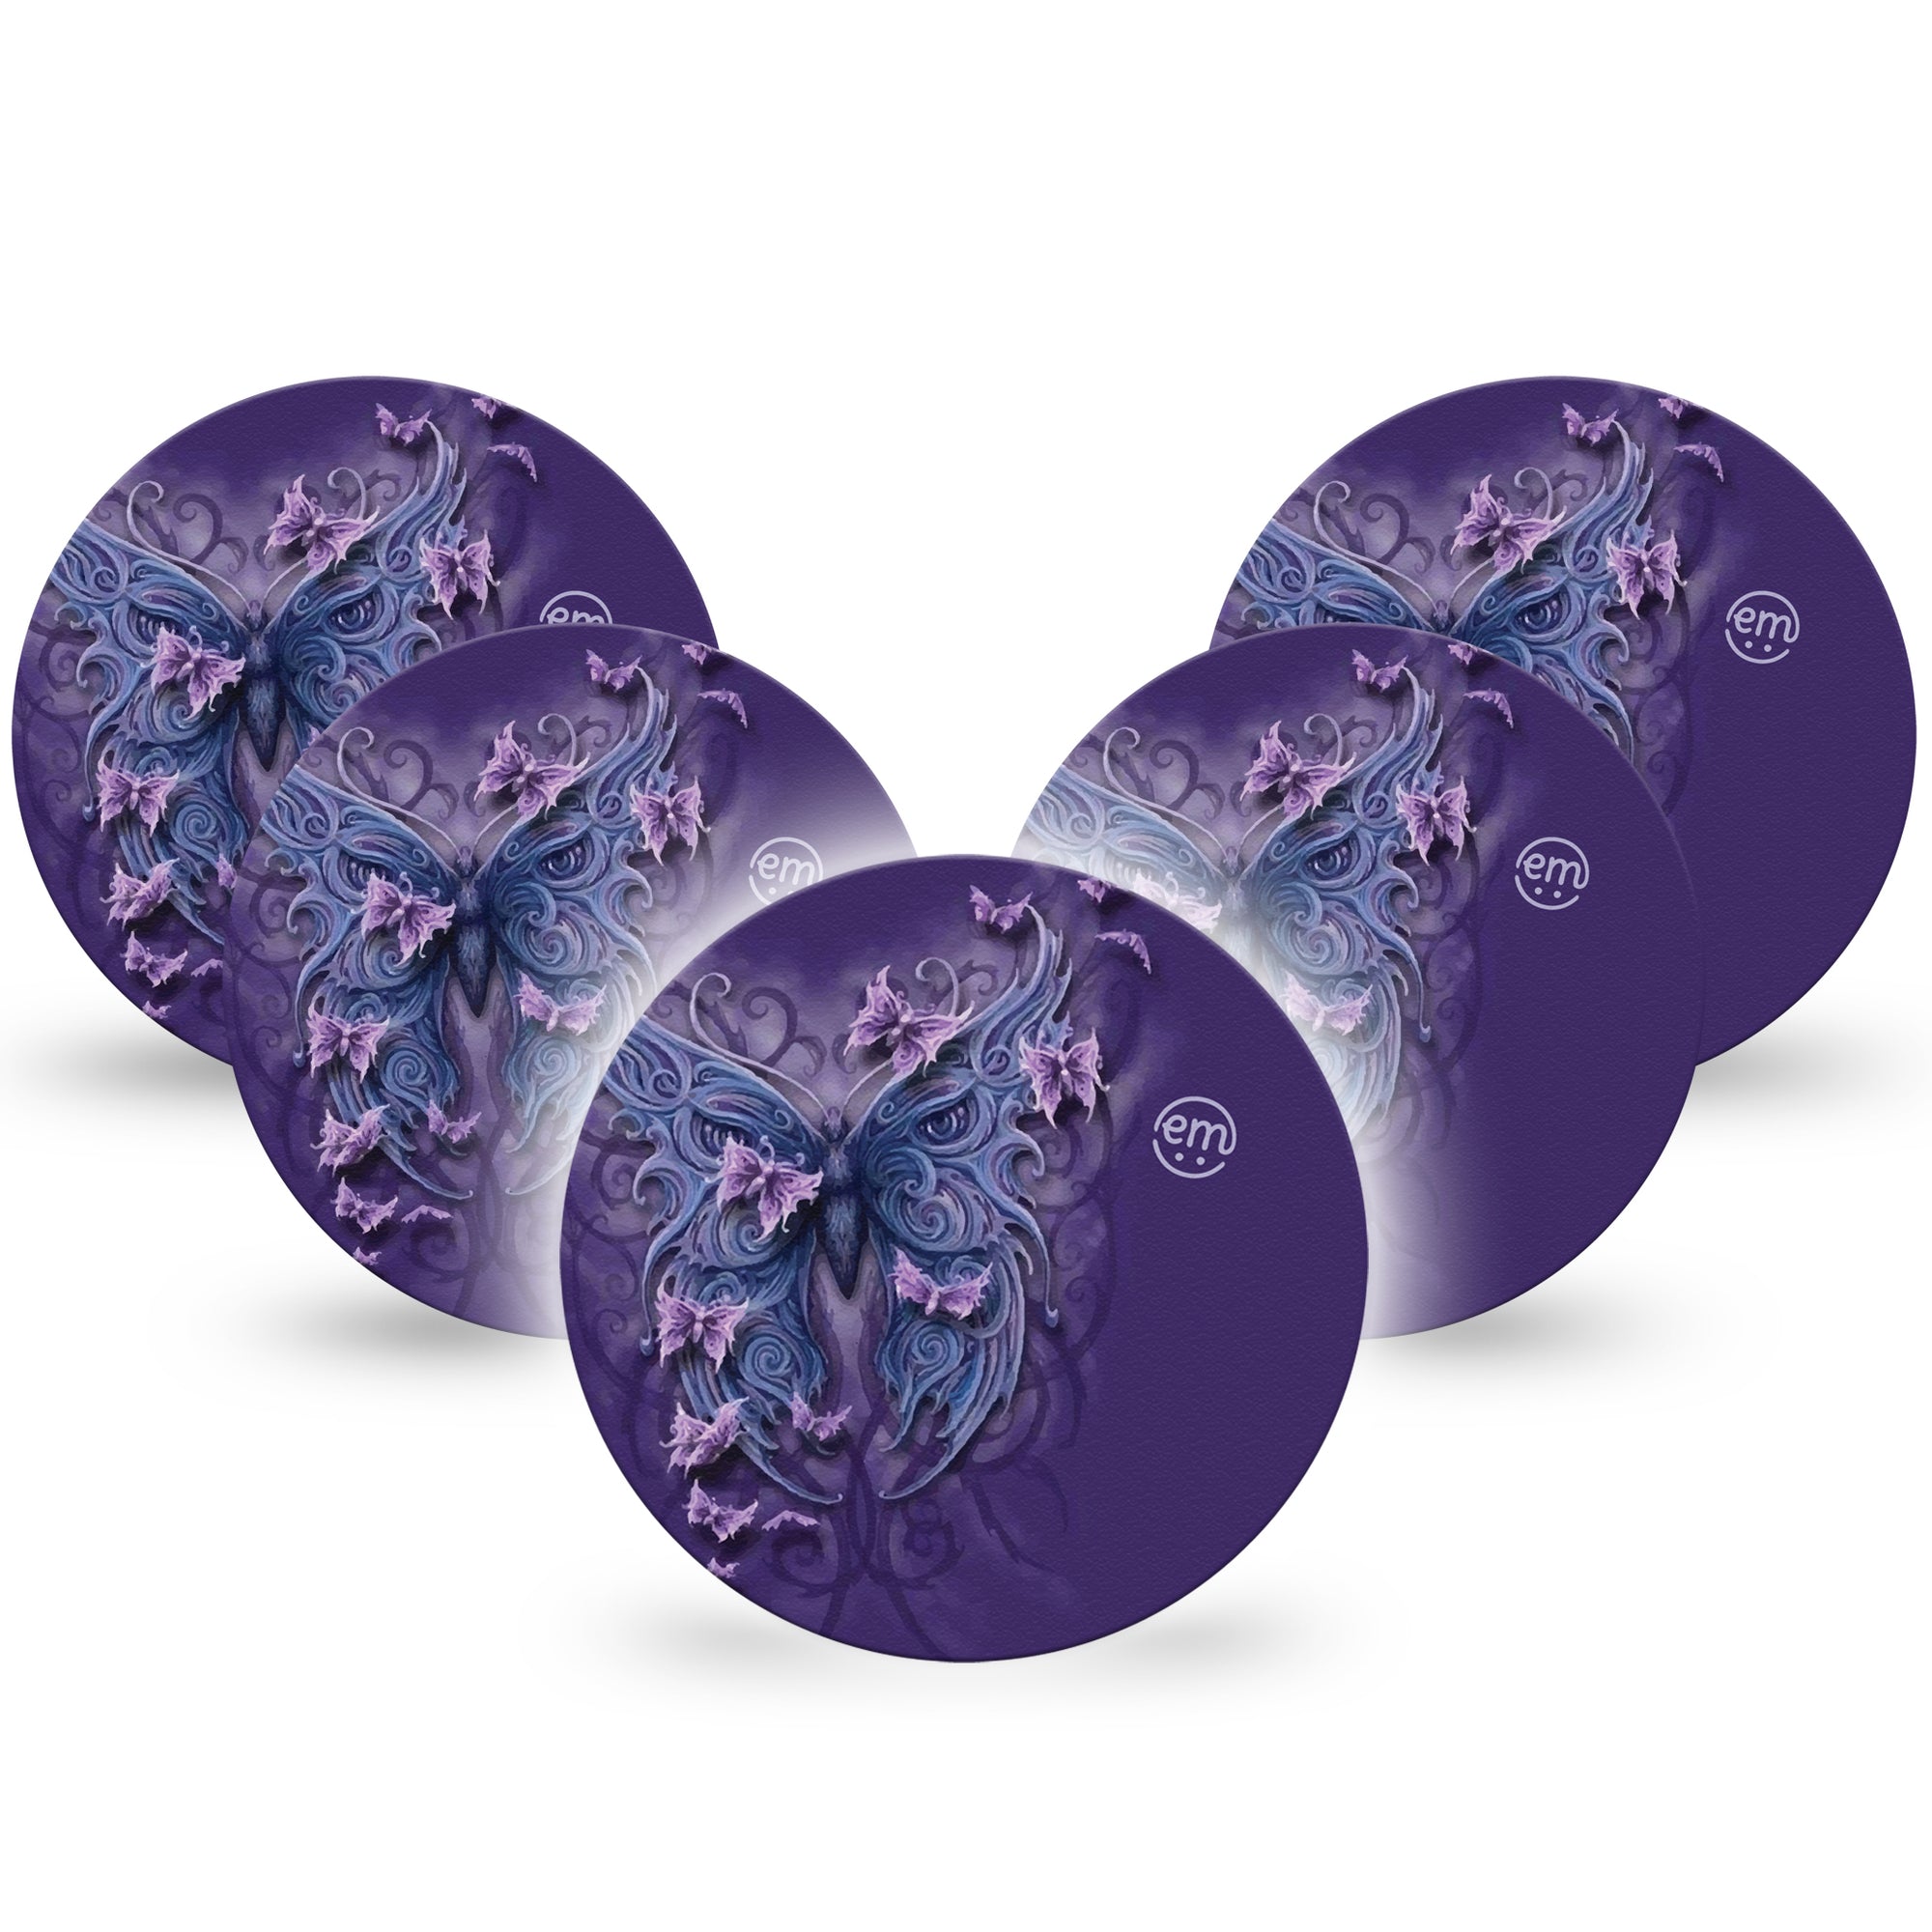 ExpressionMed Purple Butterfly Libre OverPatches